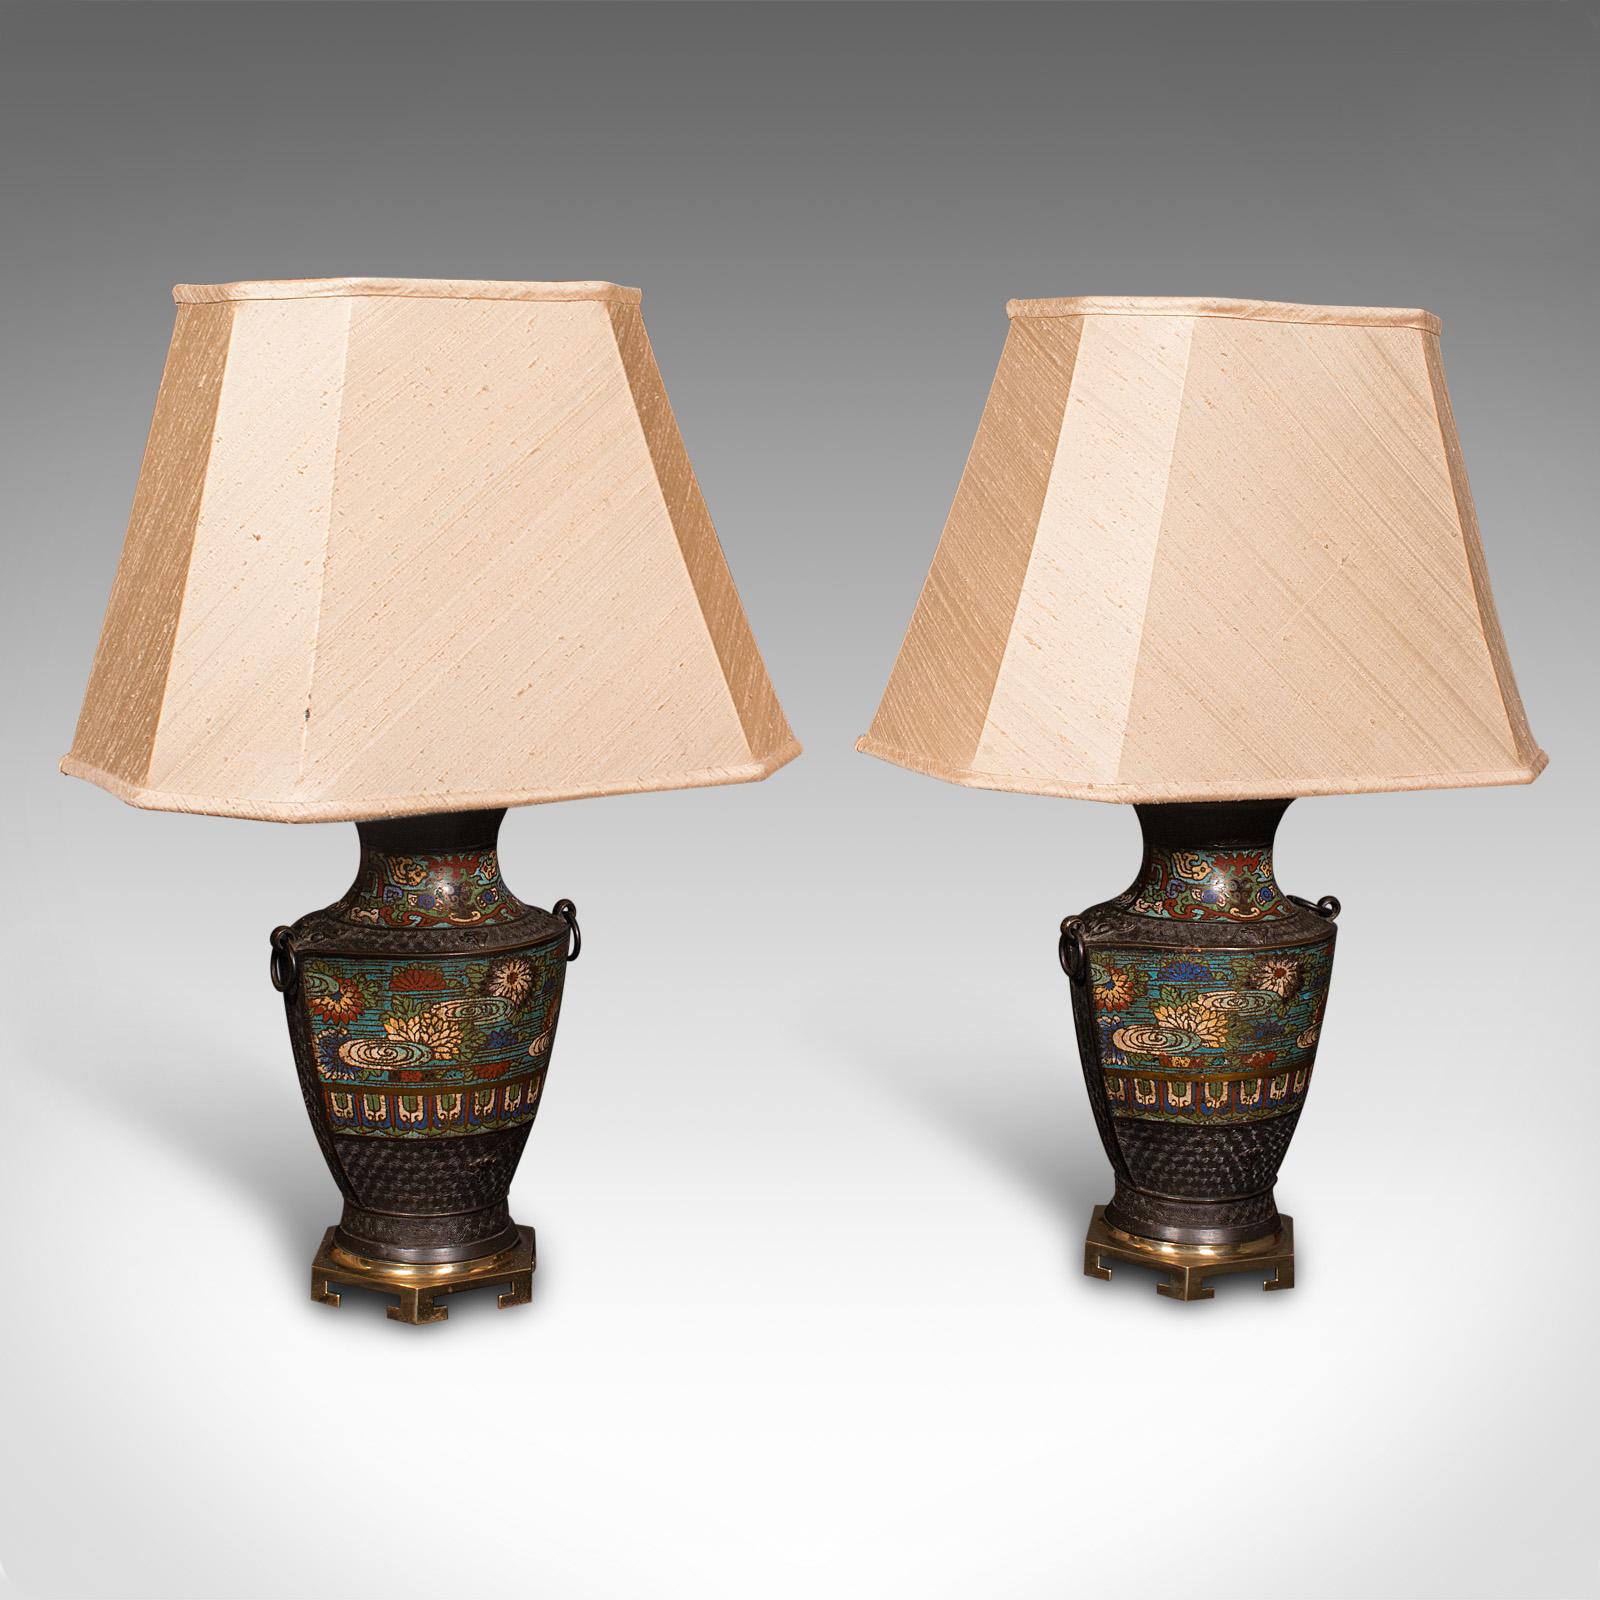 This is a pair of antique decorative lamps. A Japanese, bronze and enamel temple jar light, dating to the late Victorian period, circa 1880.

Charming colour to these substantial decorative lamps
Displaying a desirable aged patina and in good